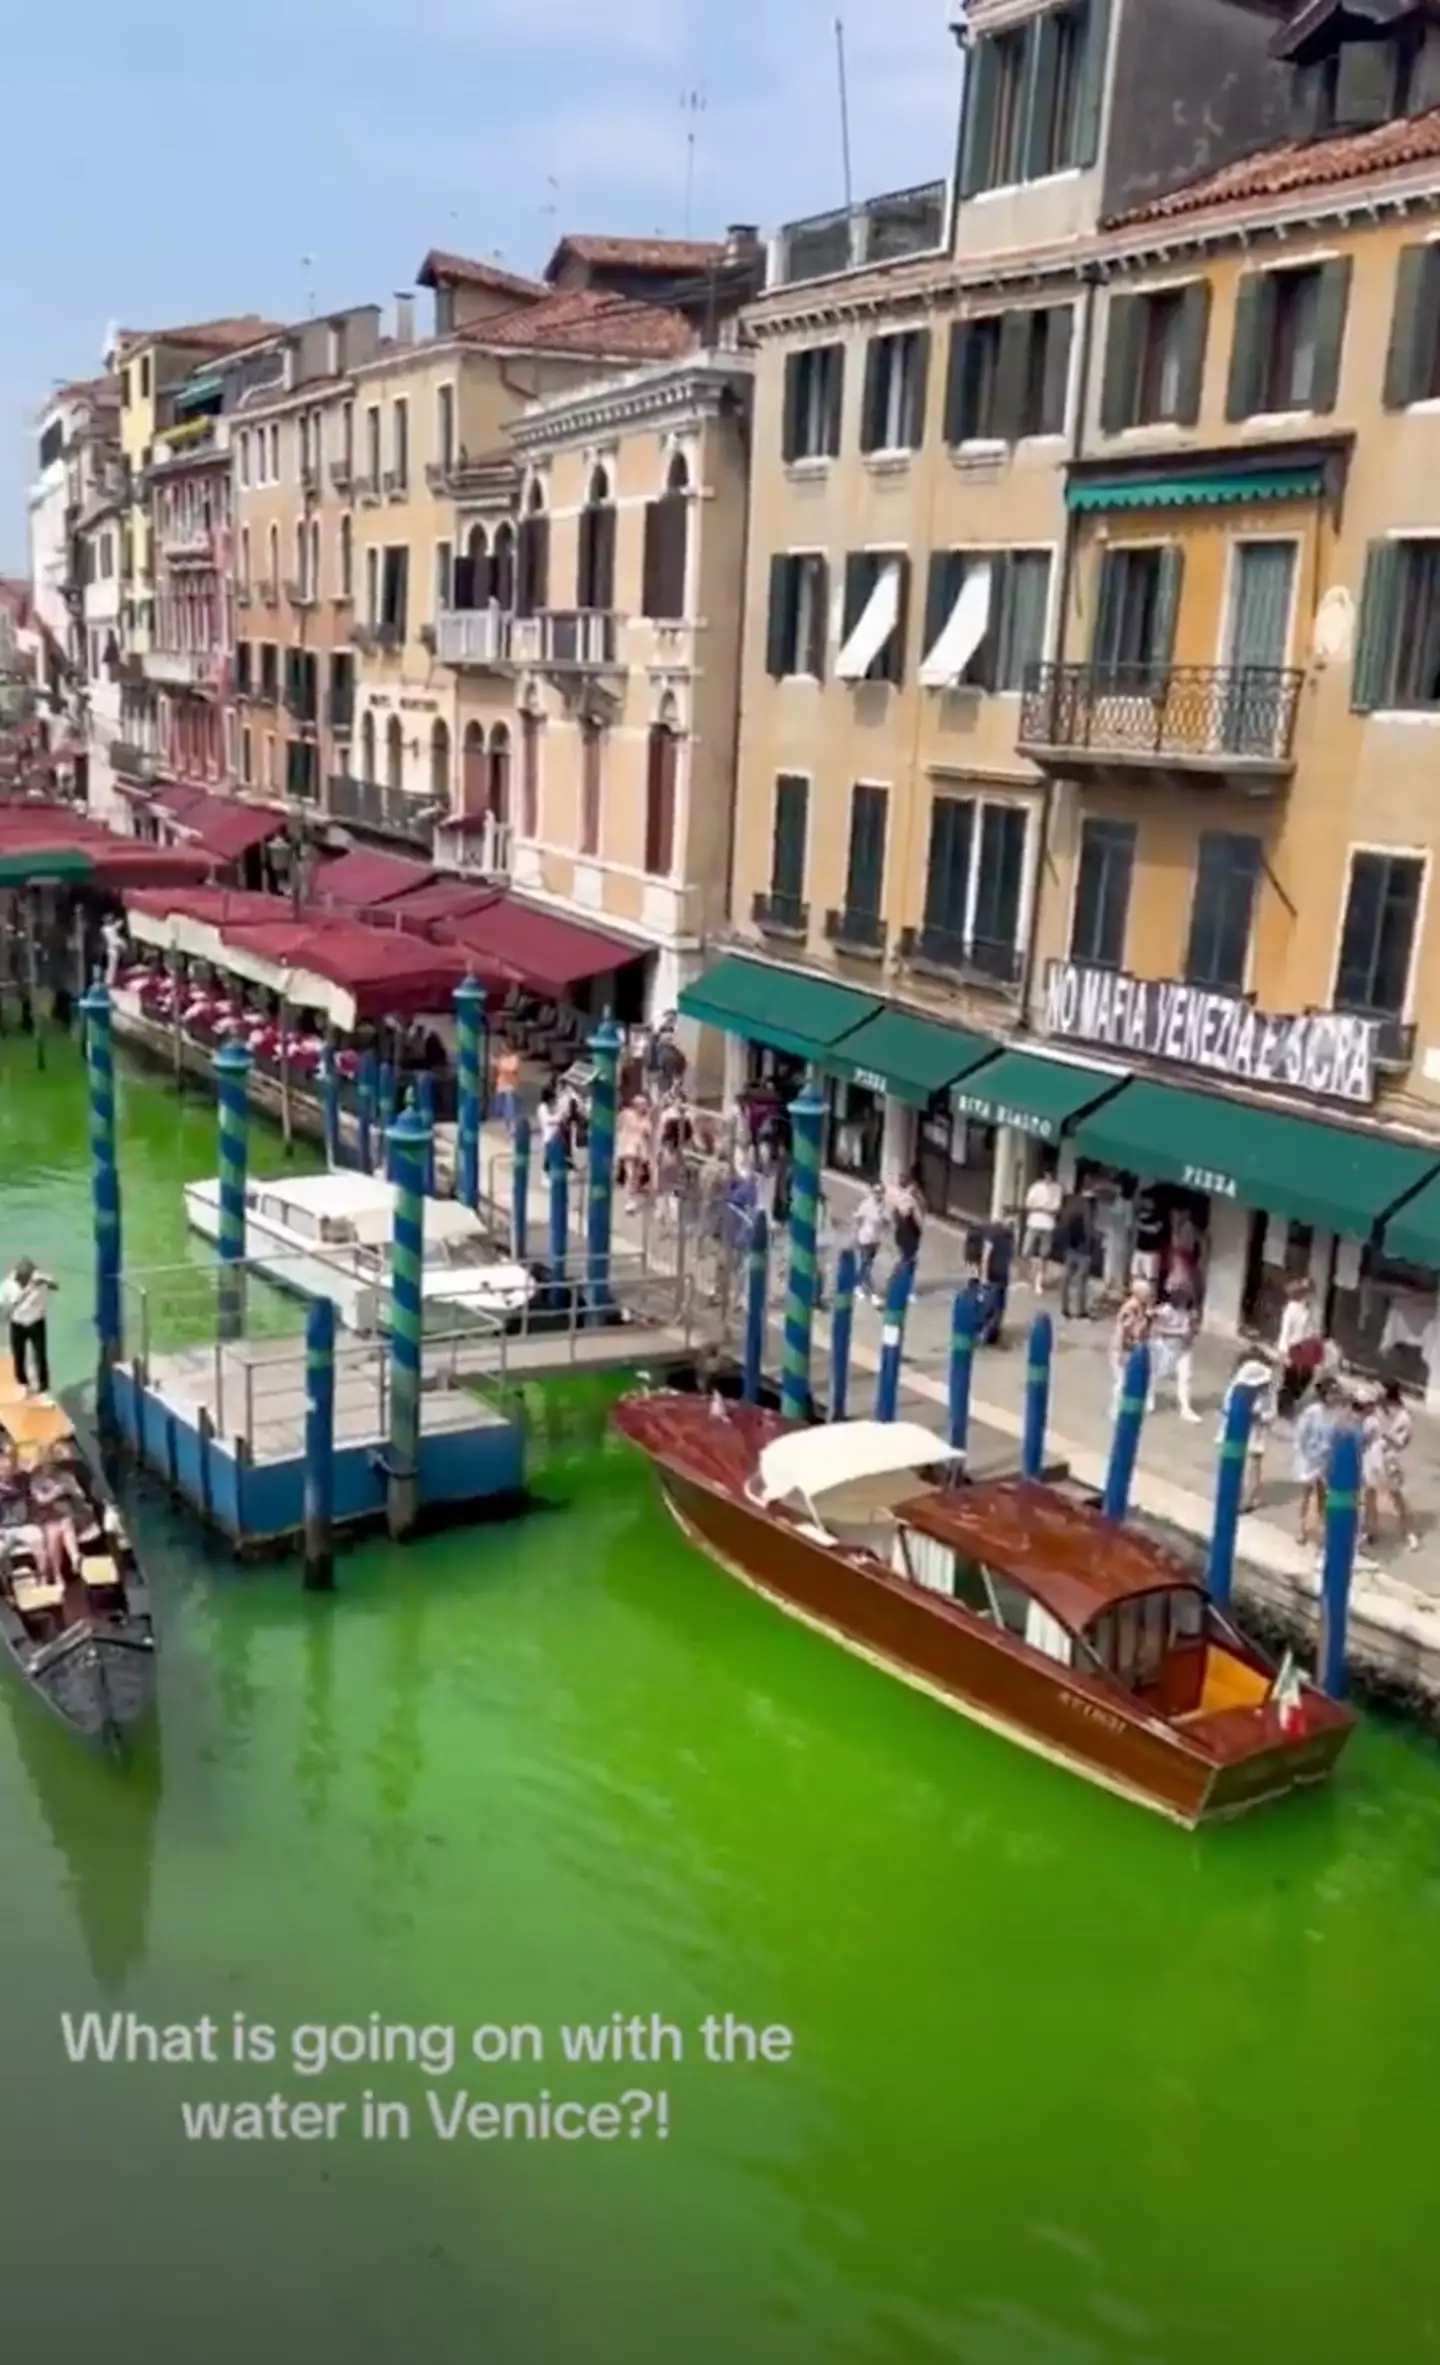 A patch of water in the Venice's iconic Grand Canal has turned fluorescent green.